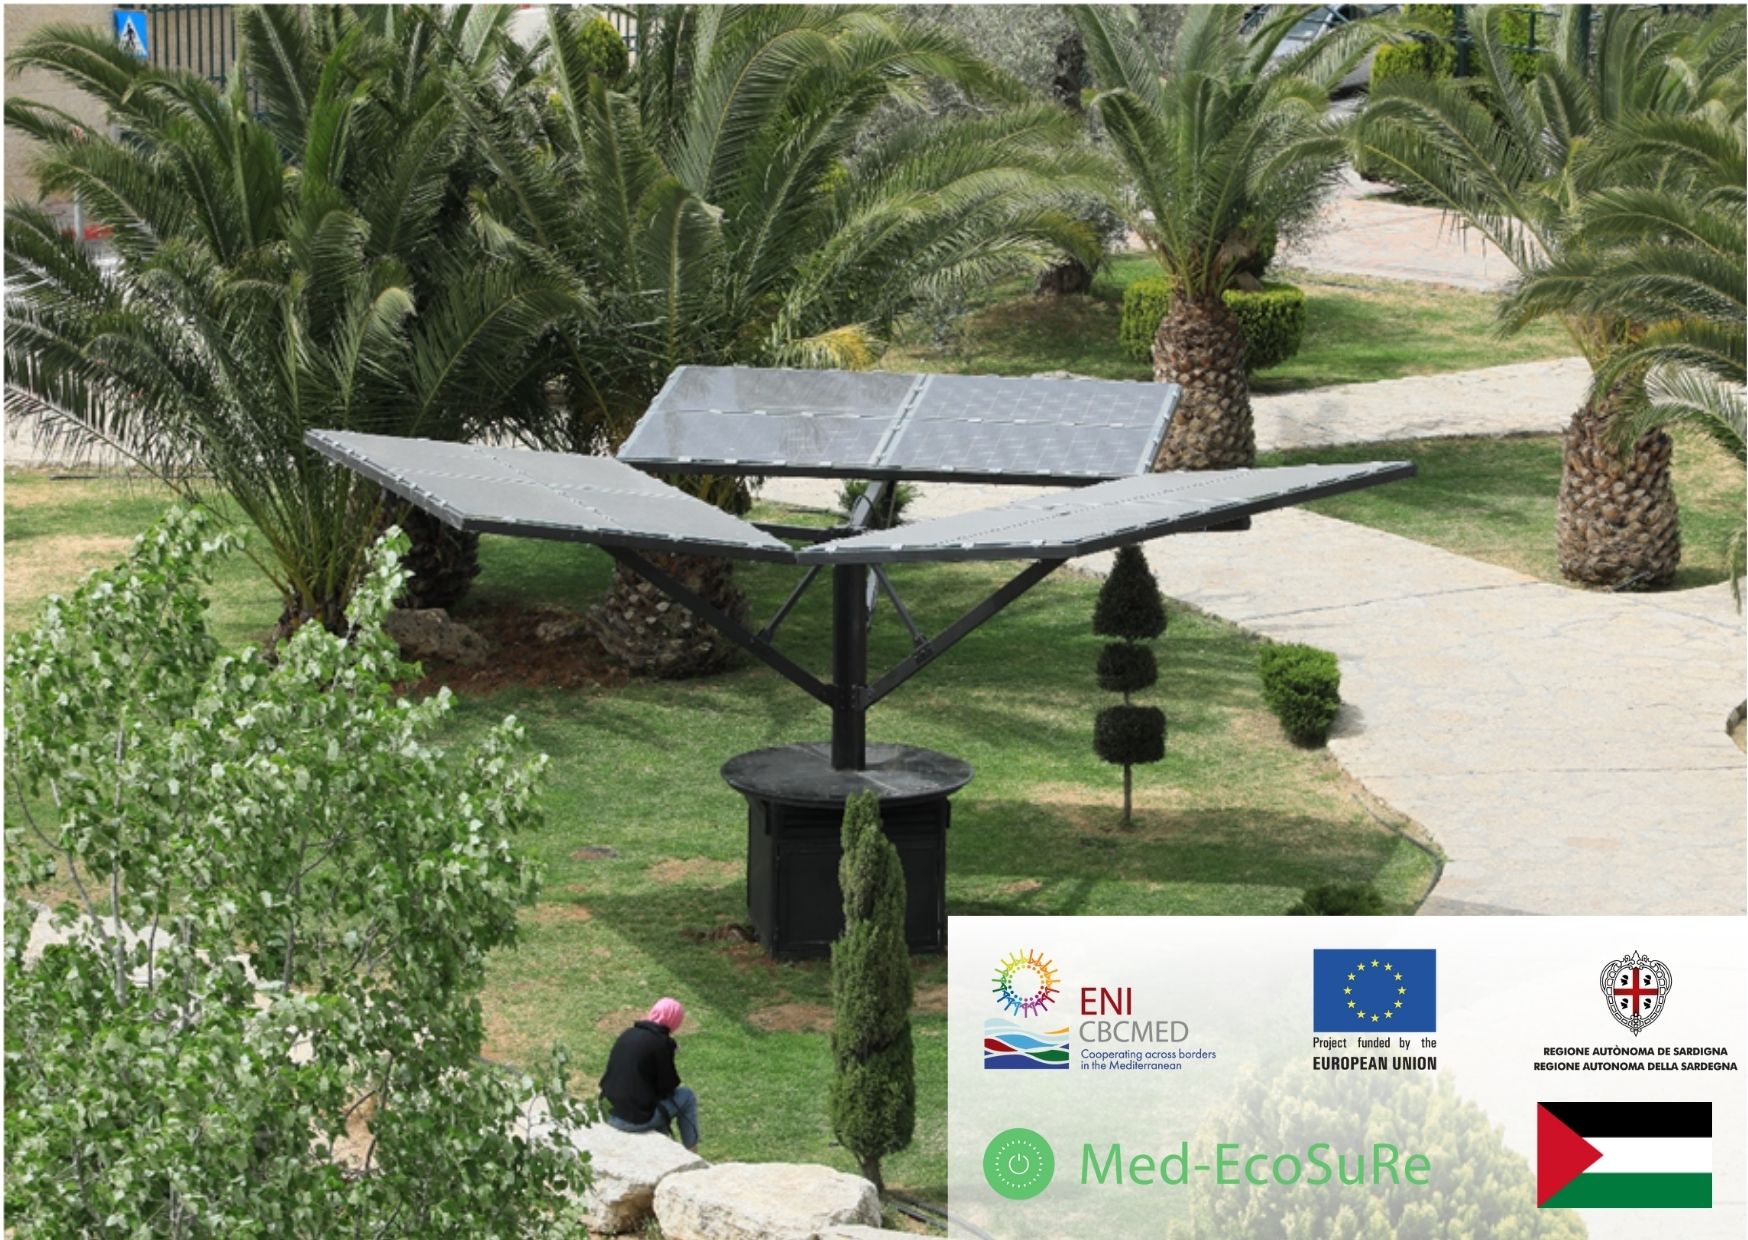 Med-EcoSuRe launching the first Solar Tree Project in Palestine